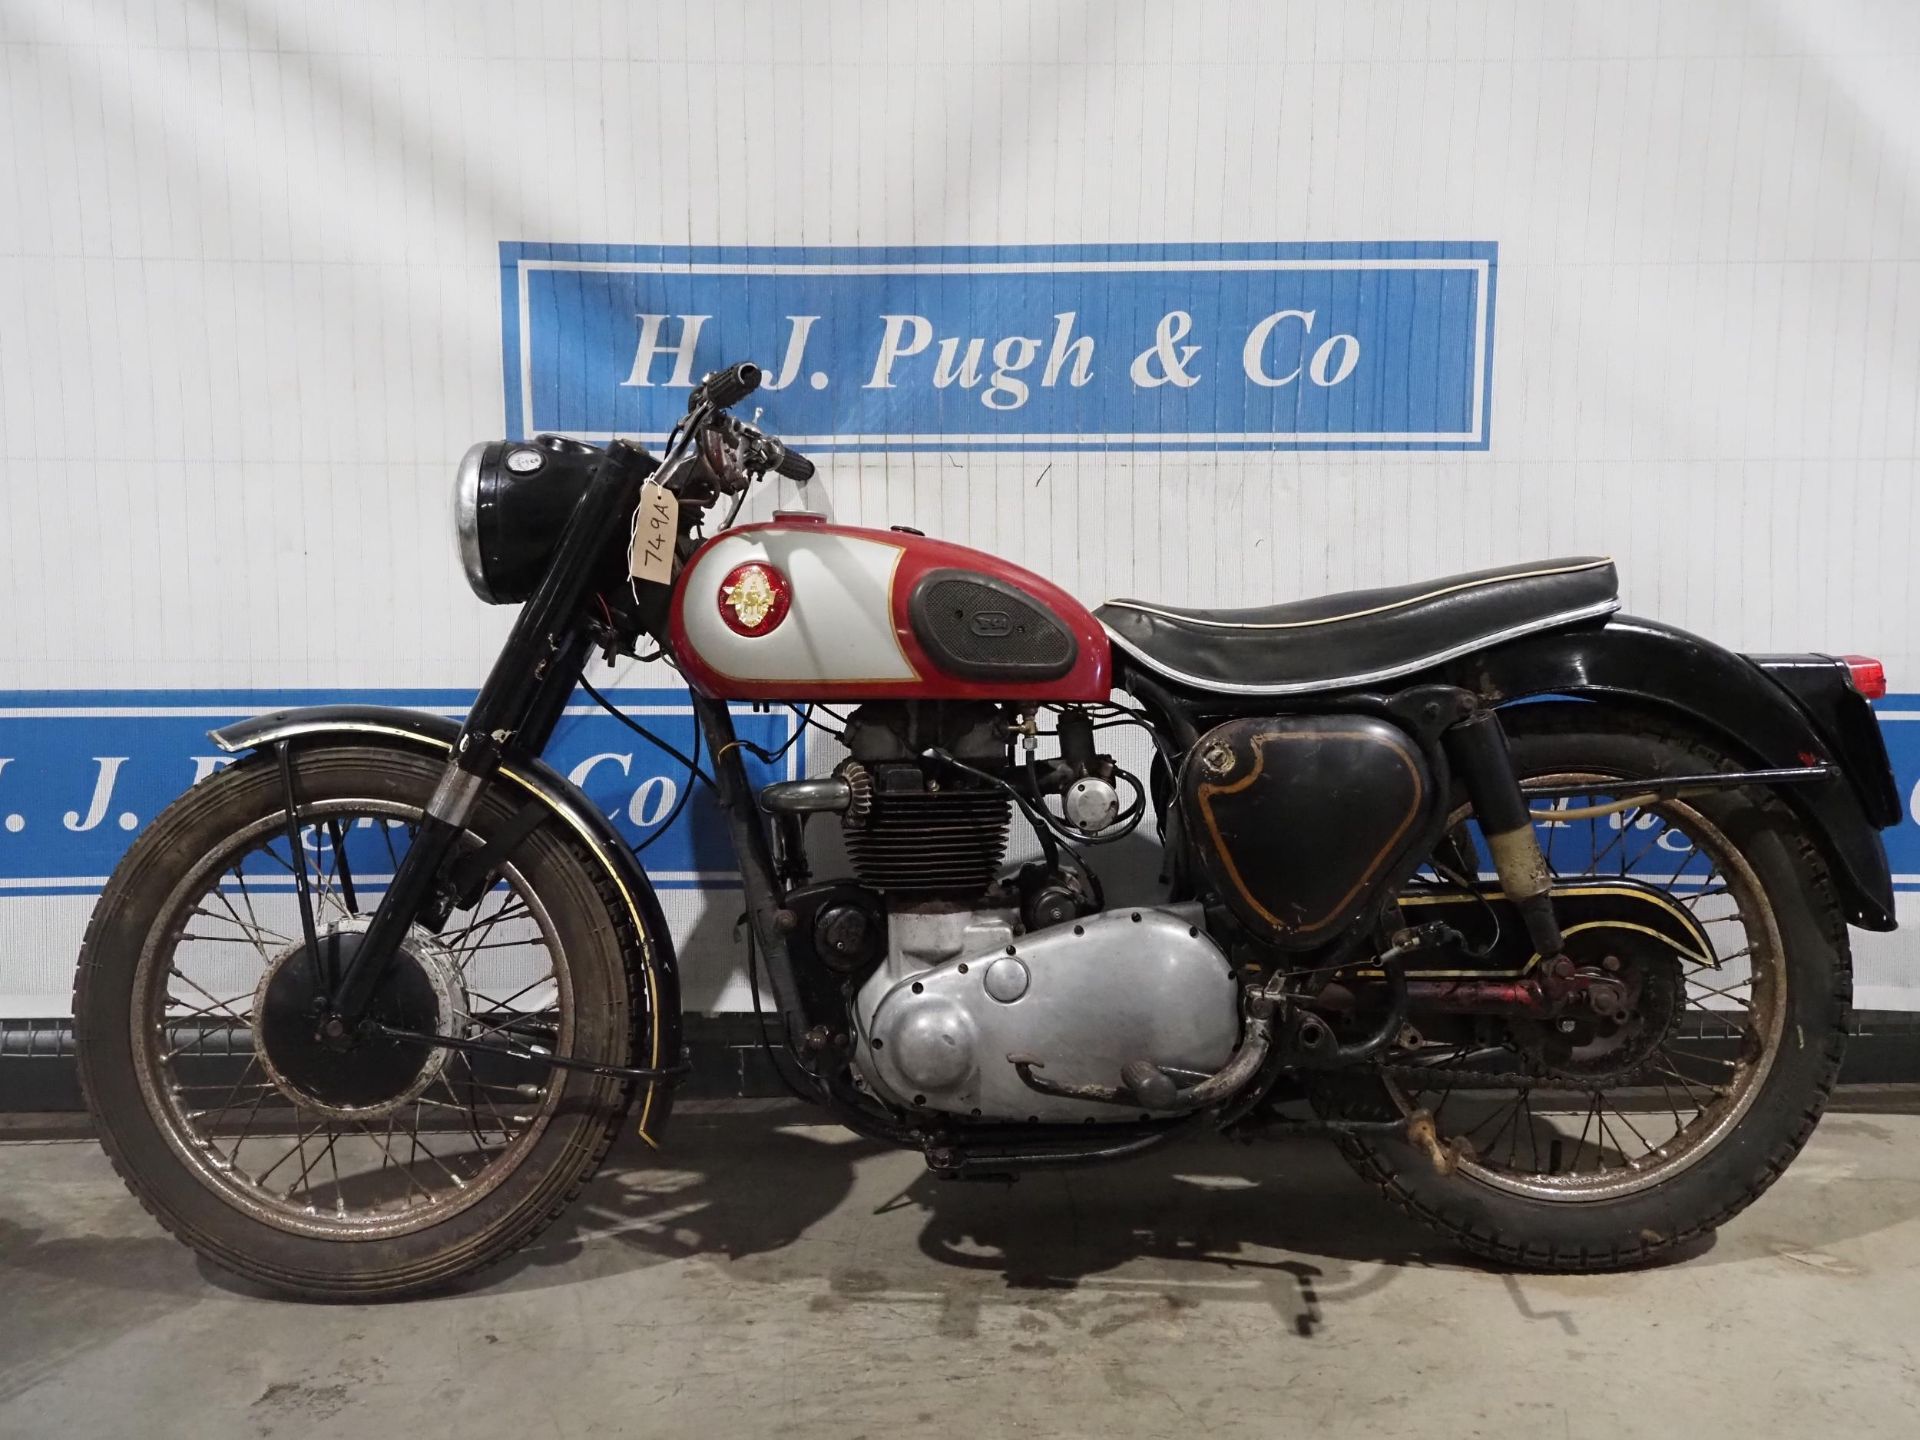 BSA A10 650 motorcycle. 1959. Ran well when last used. Reg. 218 XVW. V5 - Image 10 of 10